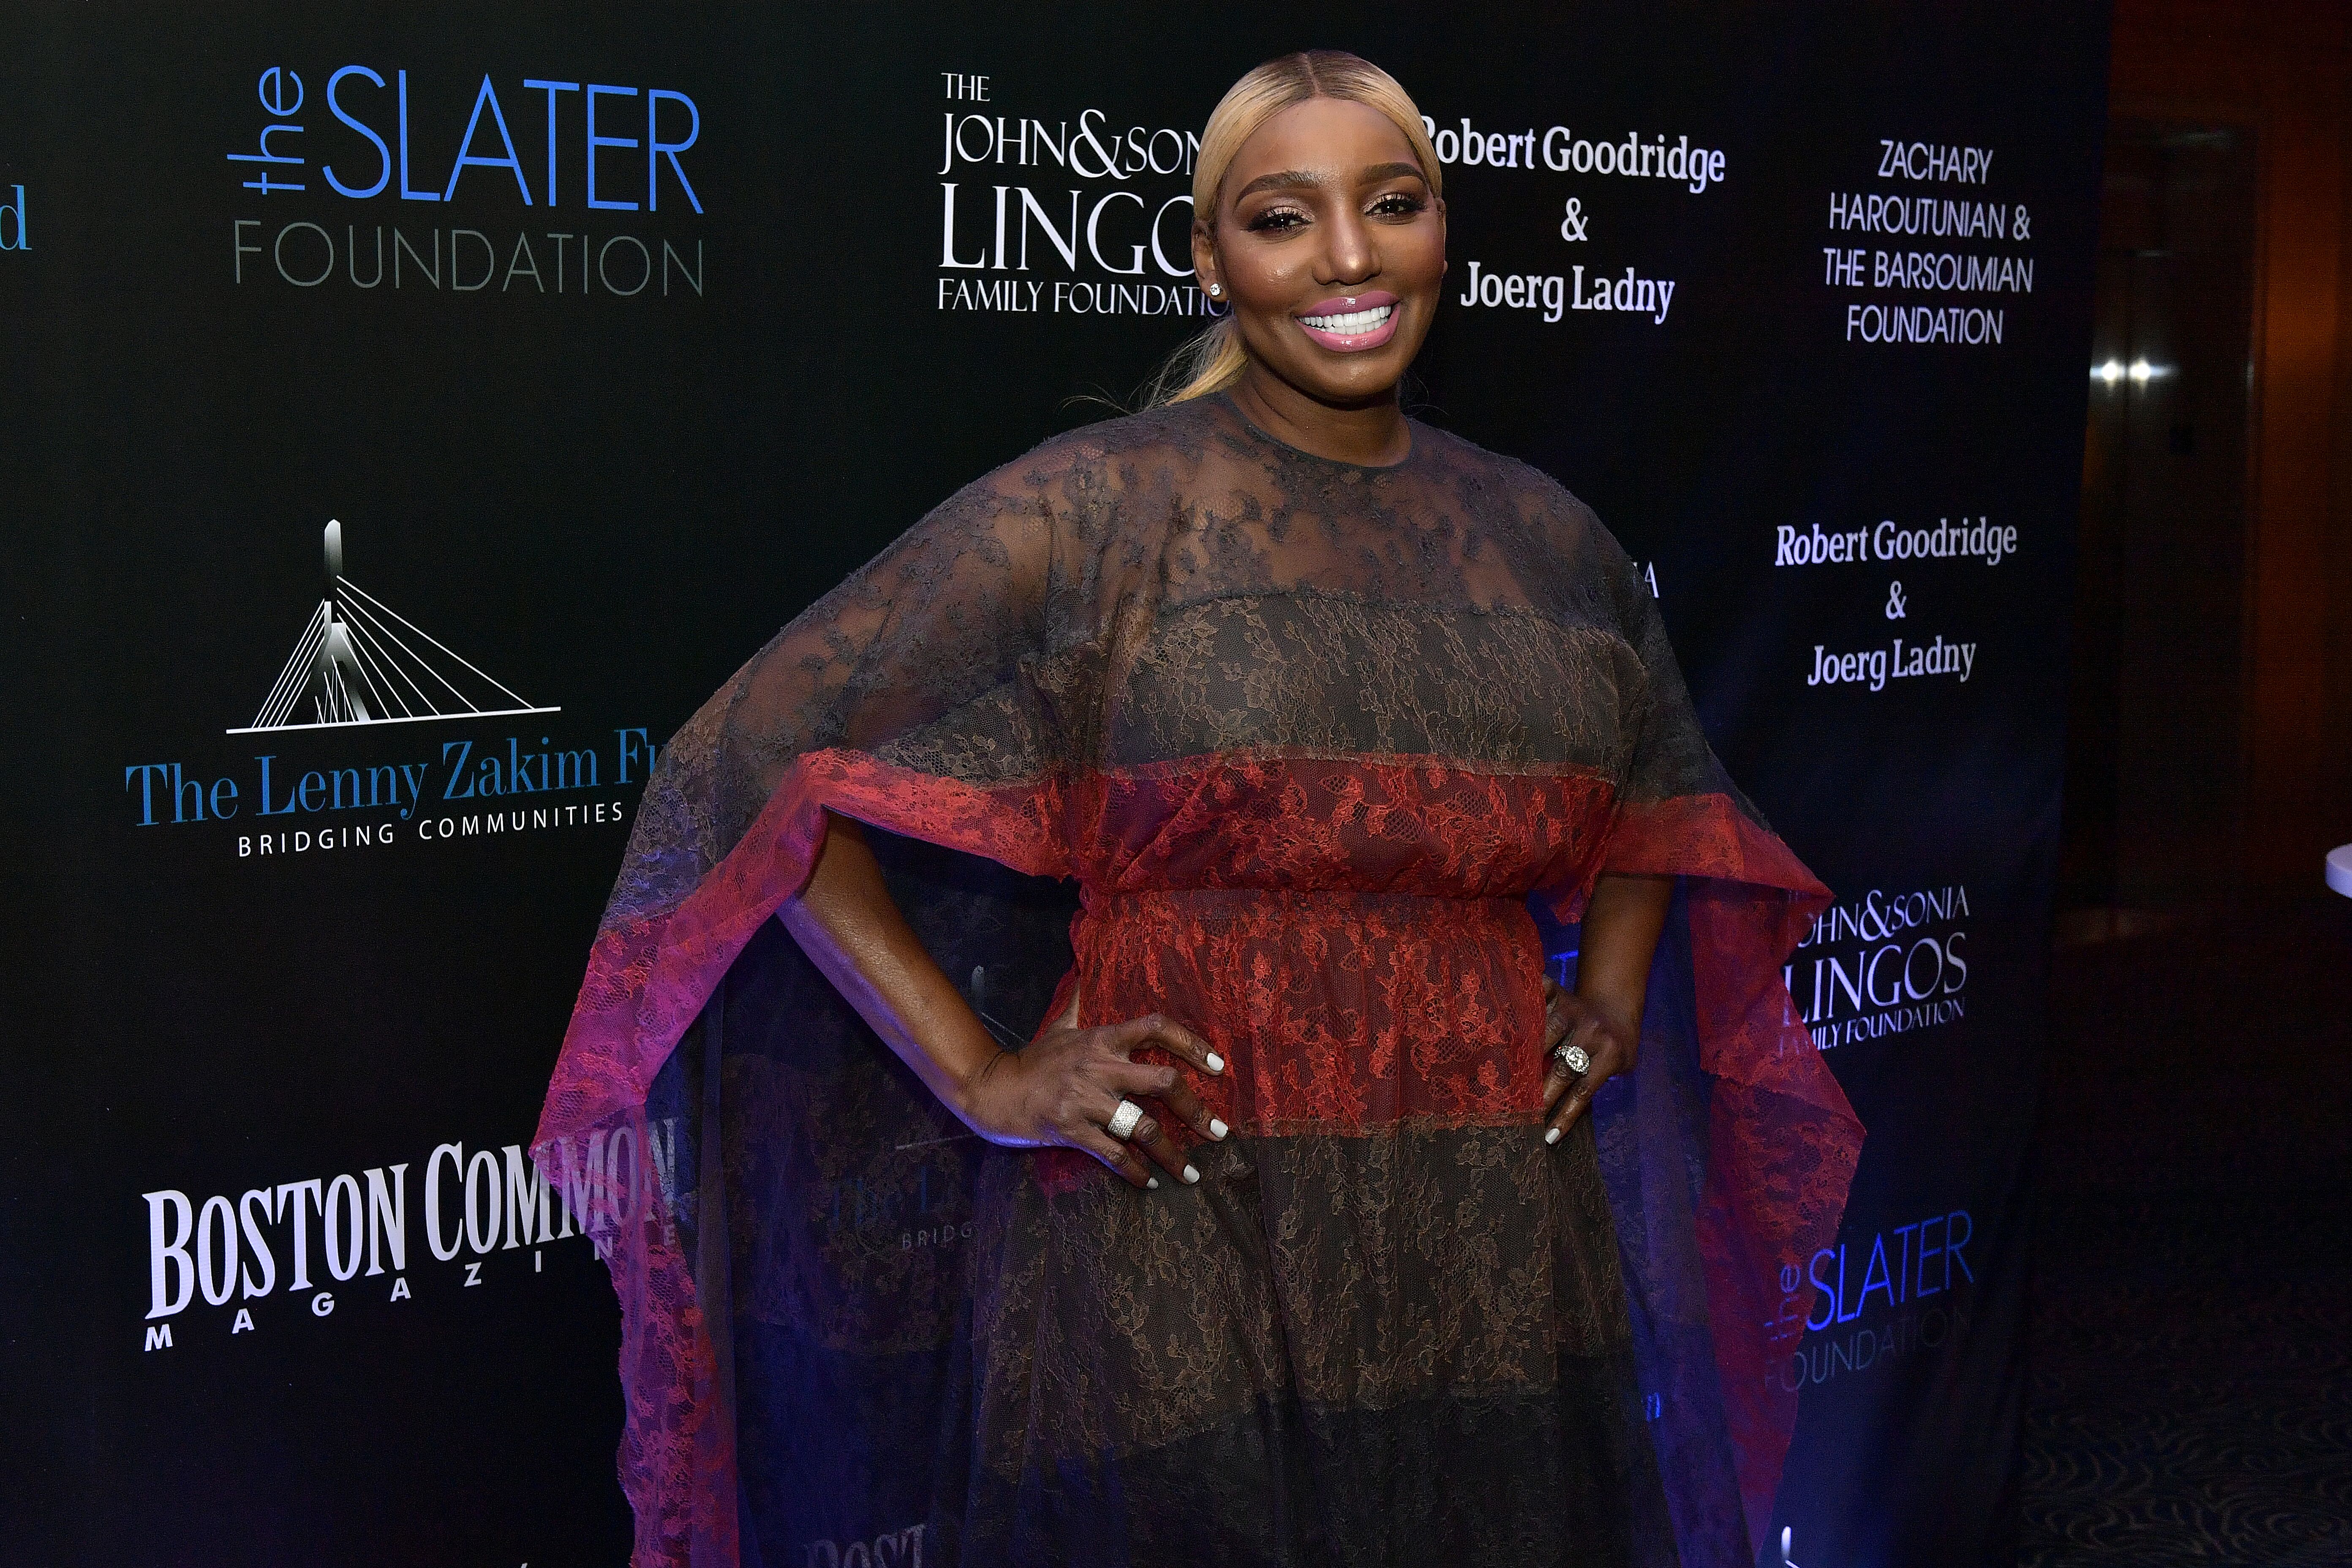 RHOA star NeNe Leakes at a Slater Foundation event/ Source: Getty Images